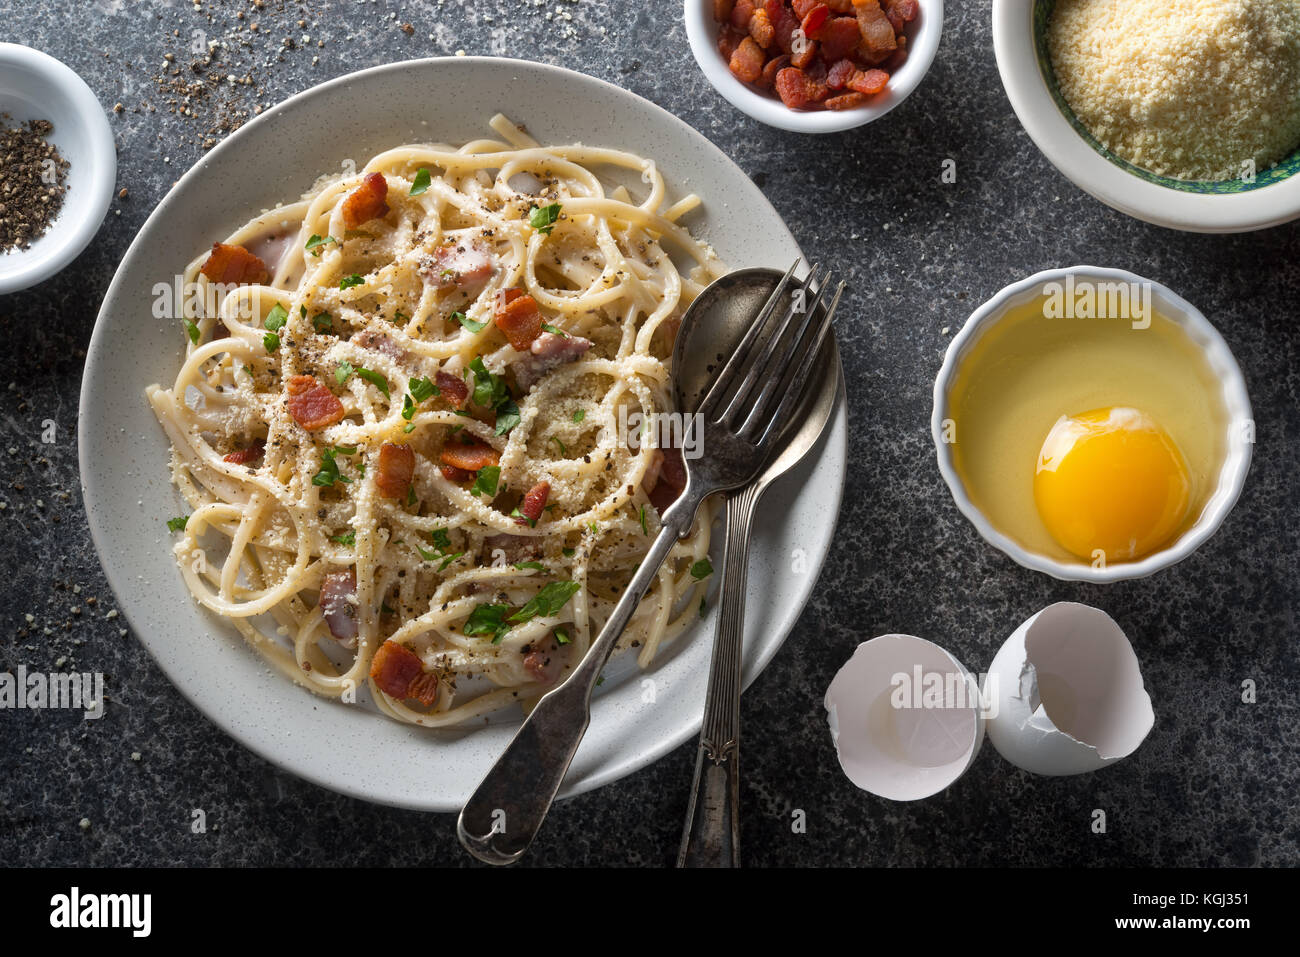 A plate of delicious pasta carbonara with fettuccine, bacon, parsley, parmesan cheese and egg. Stock Photo